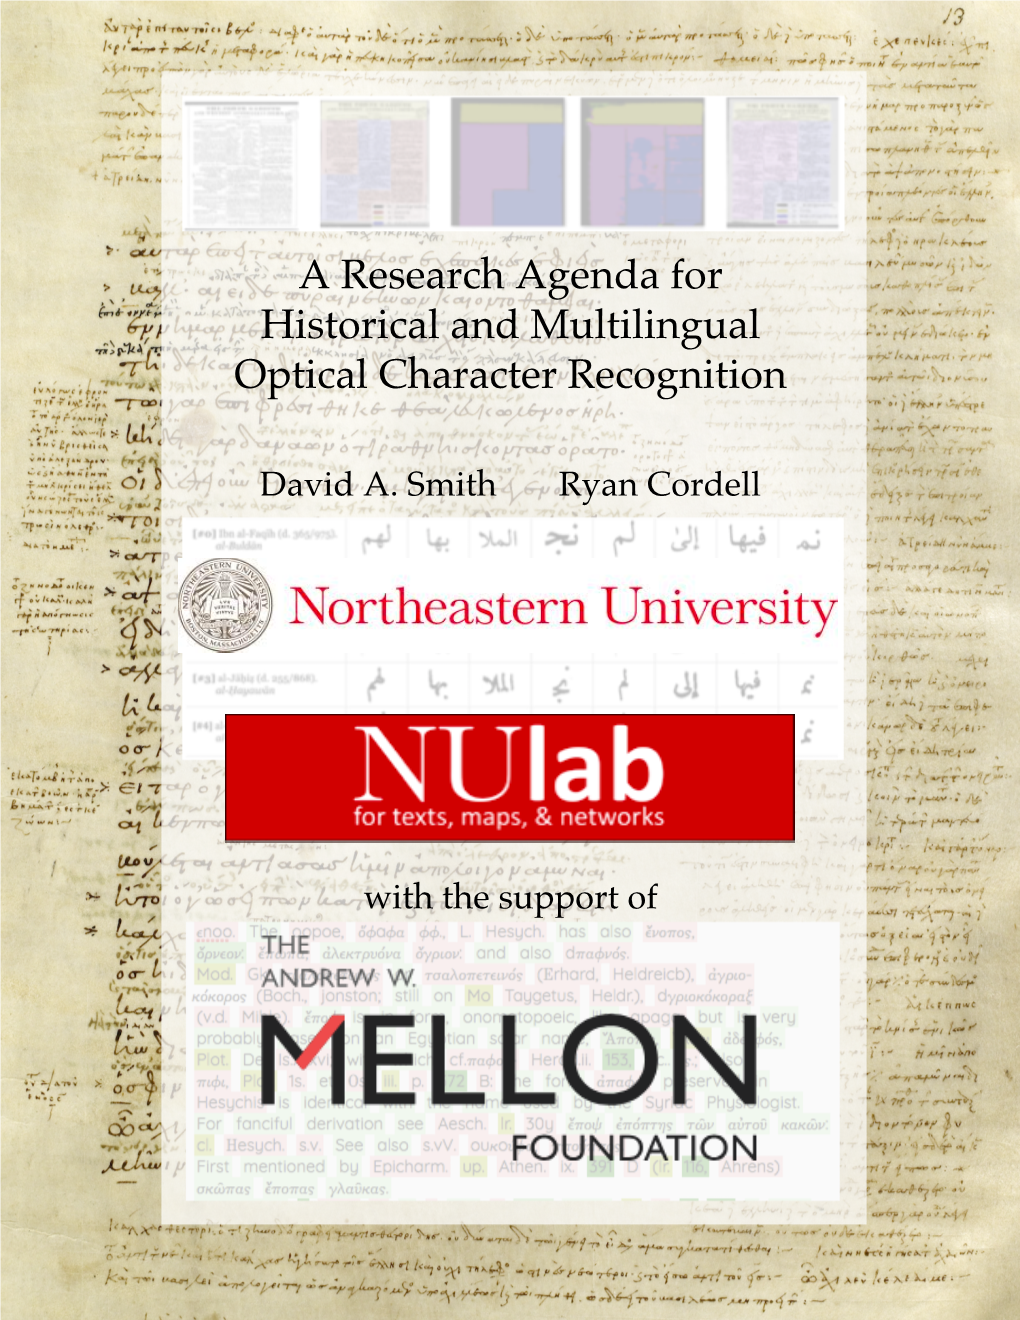 A Research Agenda for Historical and Multilingual Optical Character Recognition